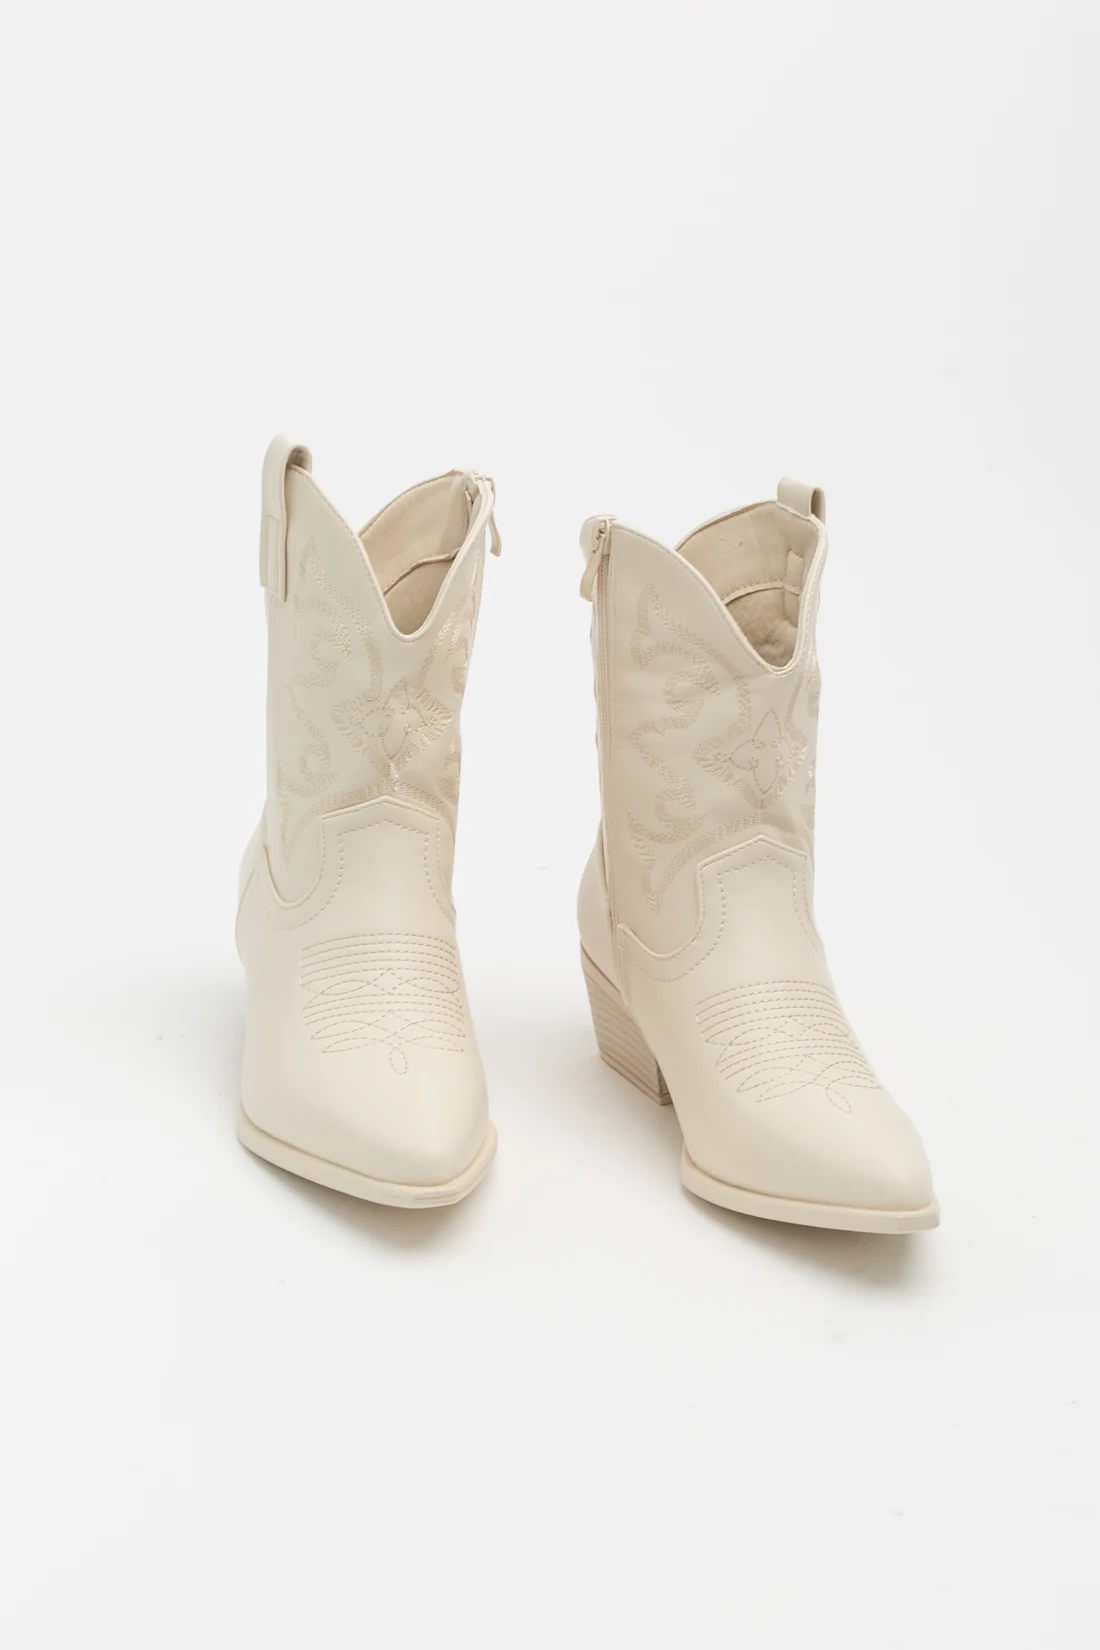 BANYO LOW BOOT - BEIGE